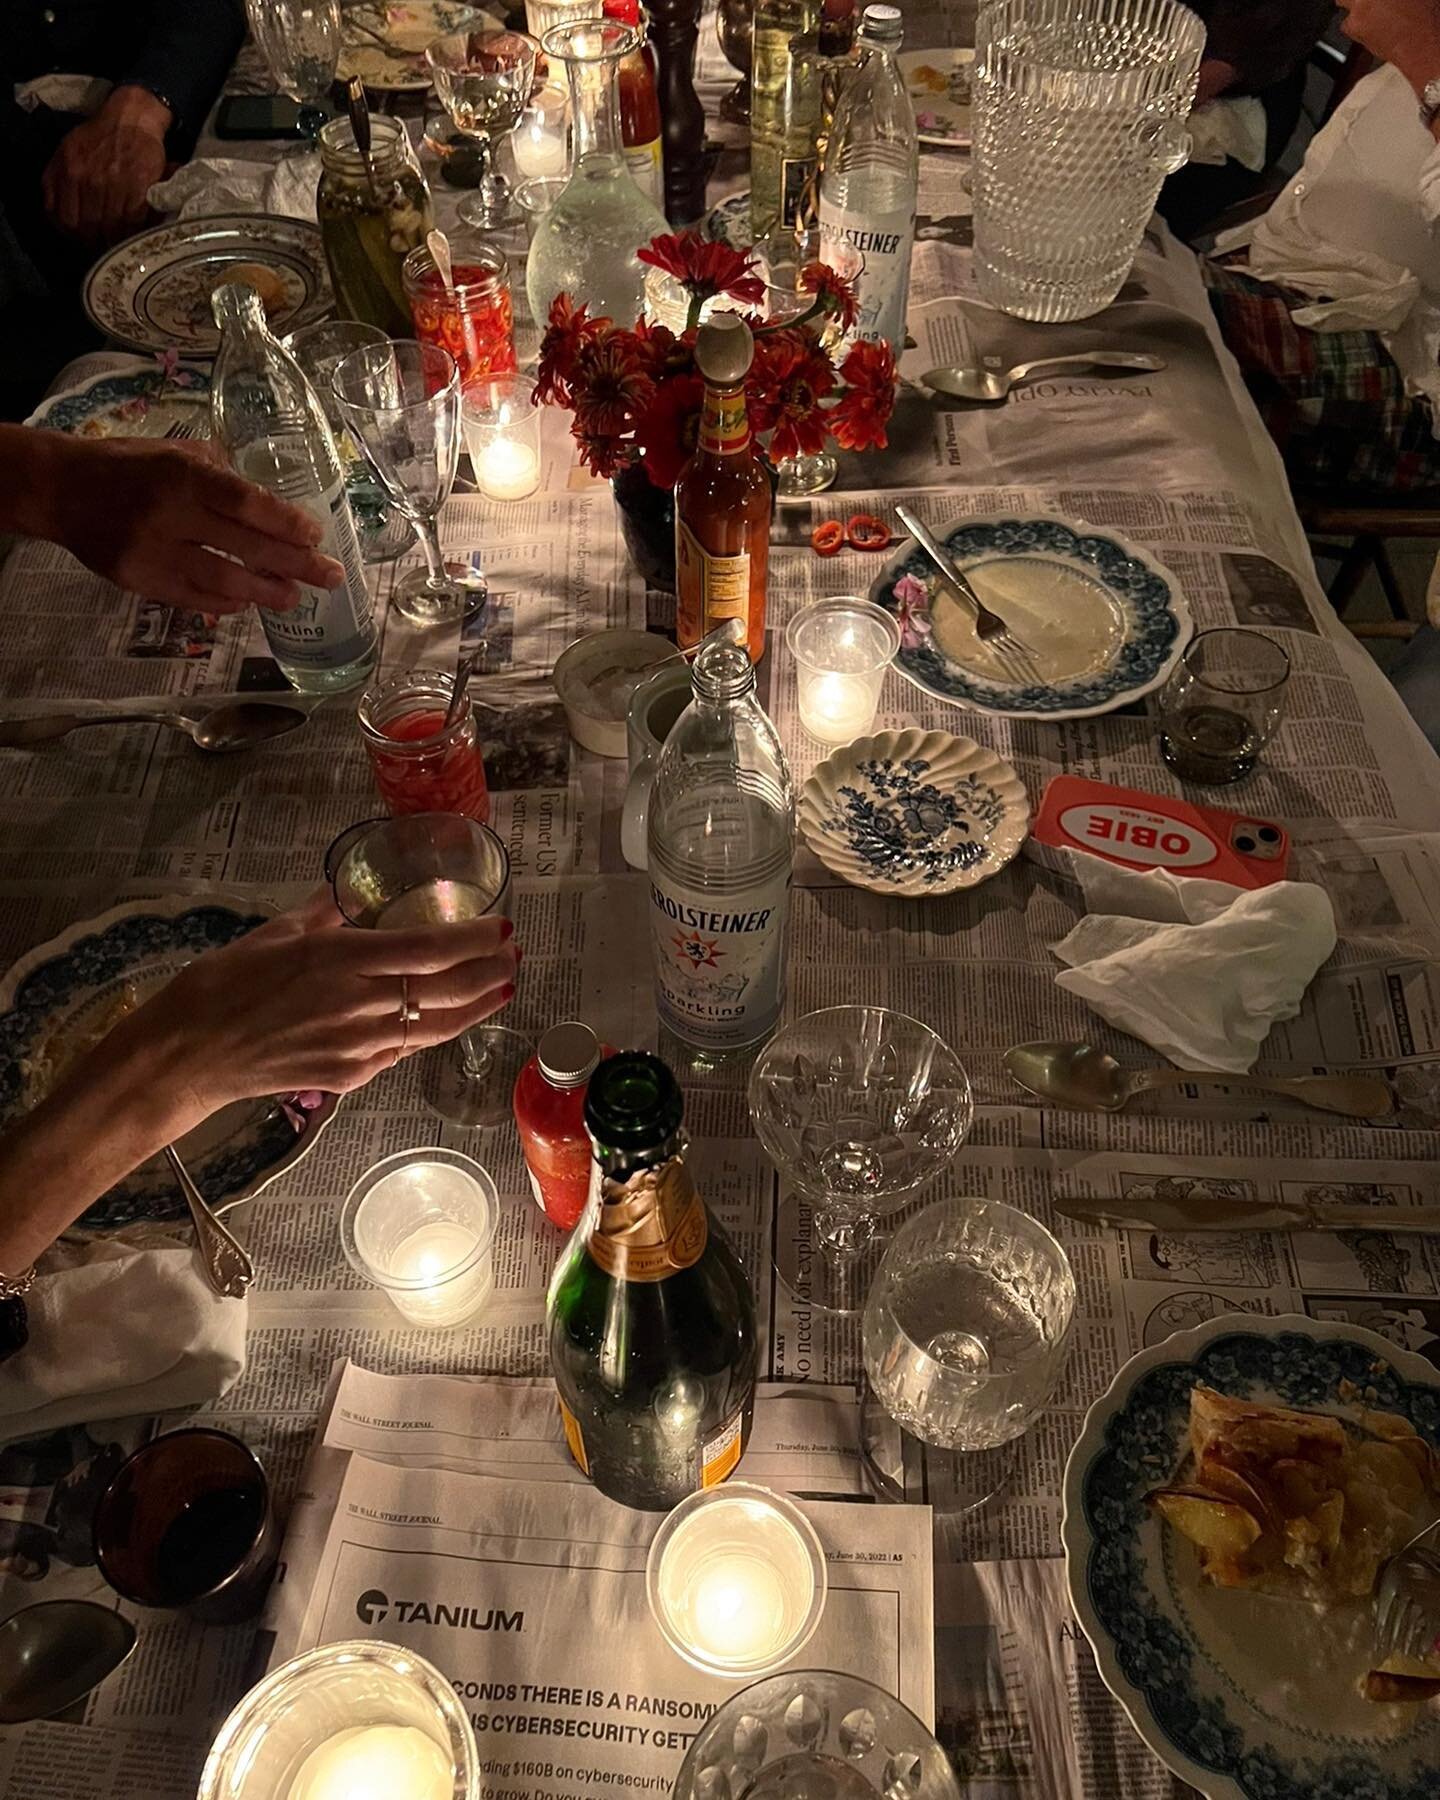 this is how we gather #friedchicken #grits #champagne #collards #homemadepickles #friedgreentomatoes #pickledonions #appletart newspaper as tablecloth #kateandamystyle #entertaining #wherewegather